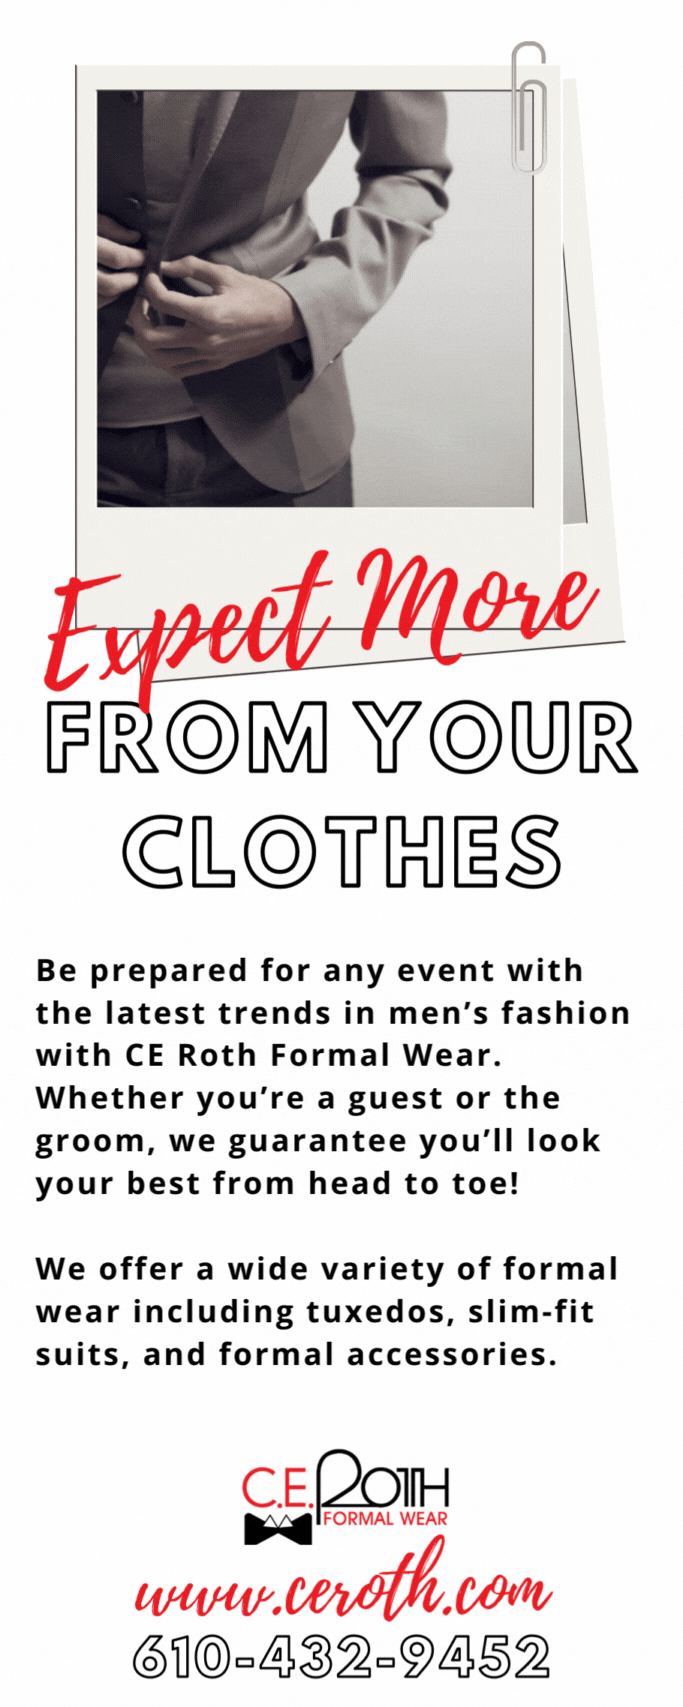 Expect More From Your Clothes! 3